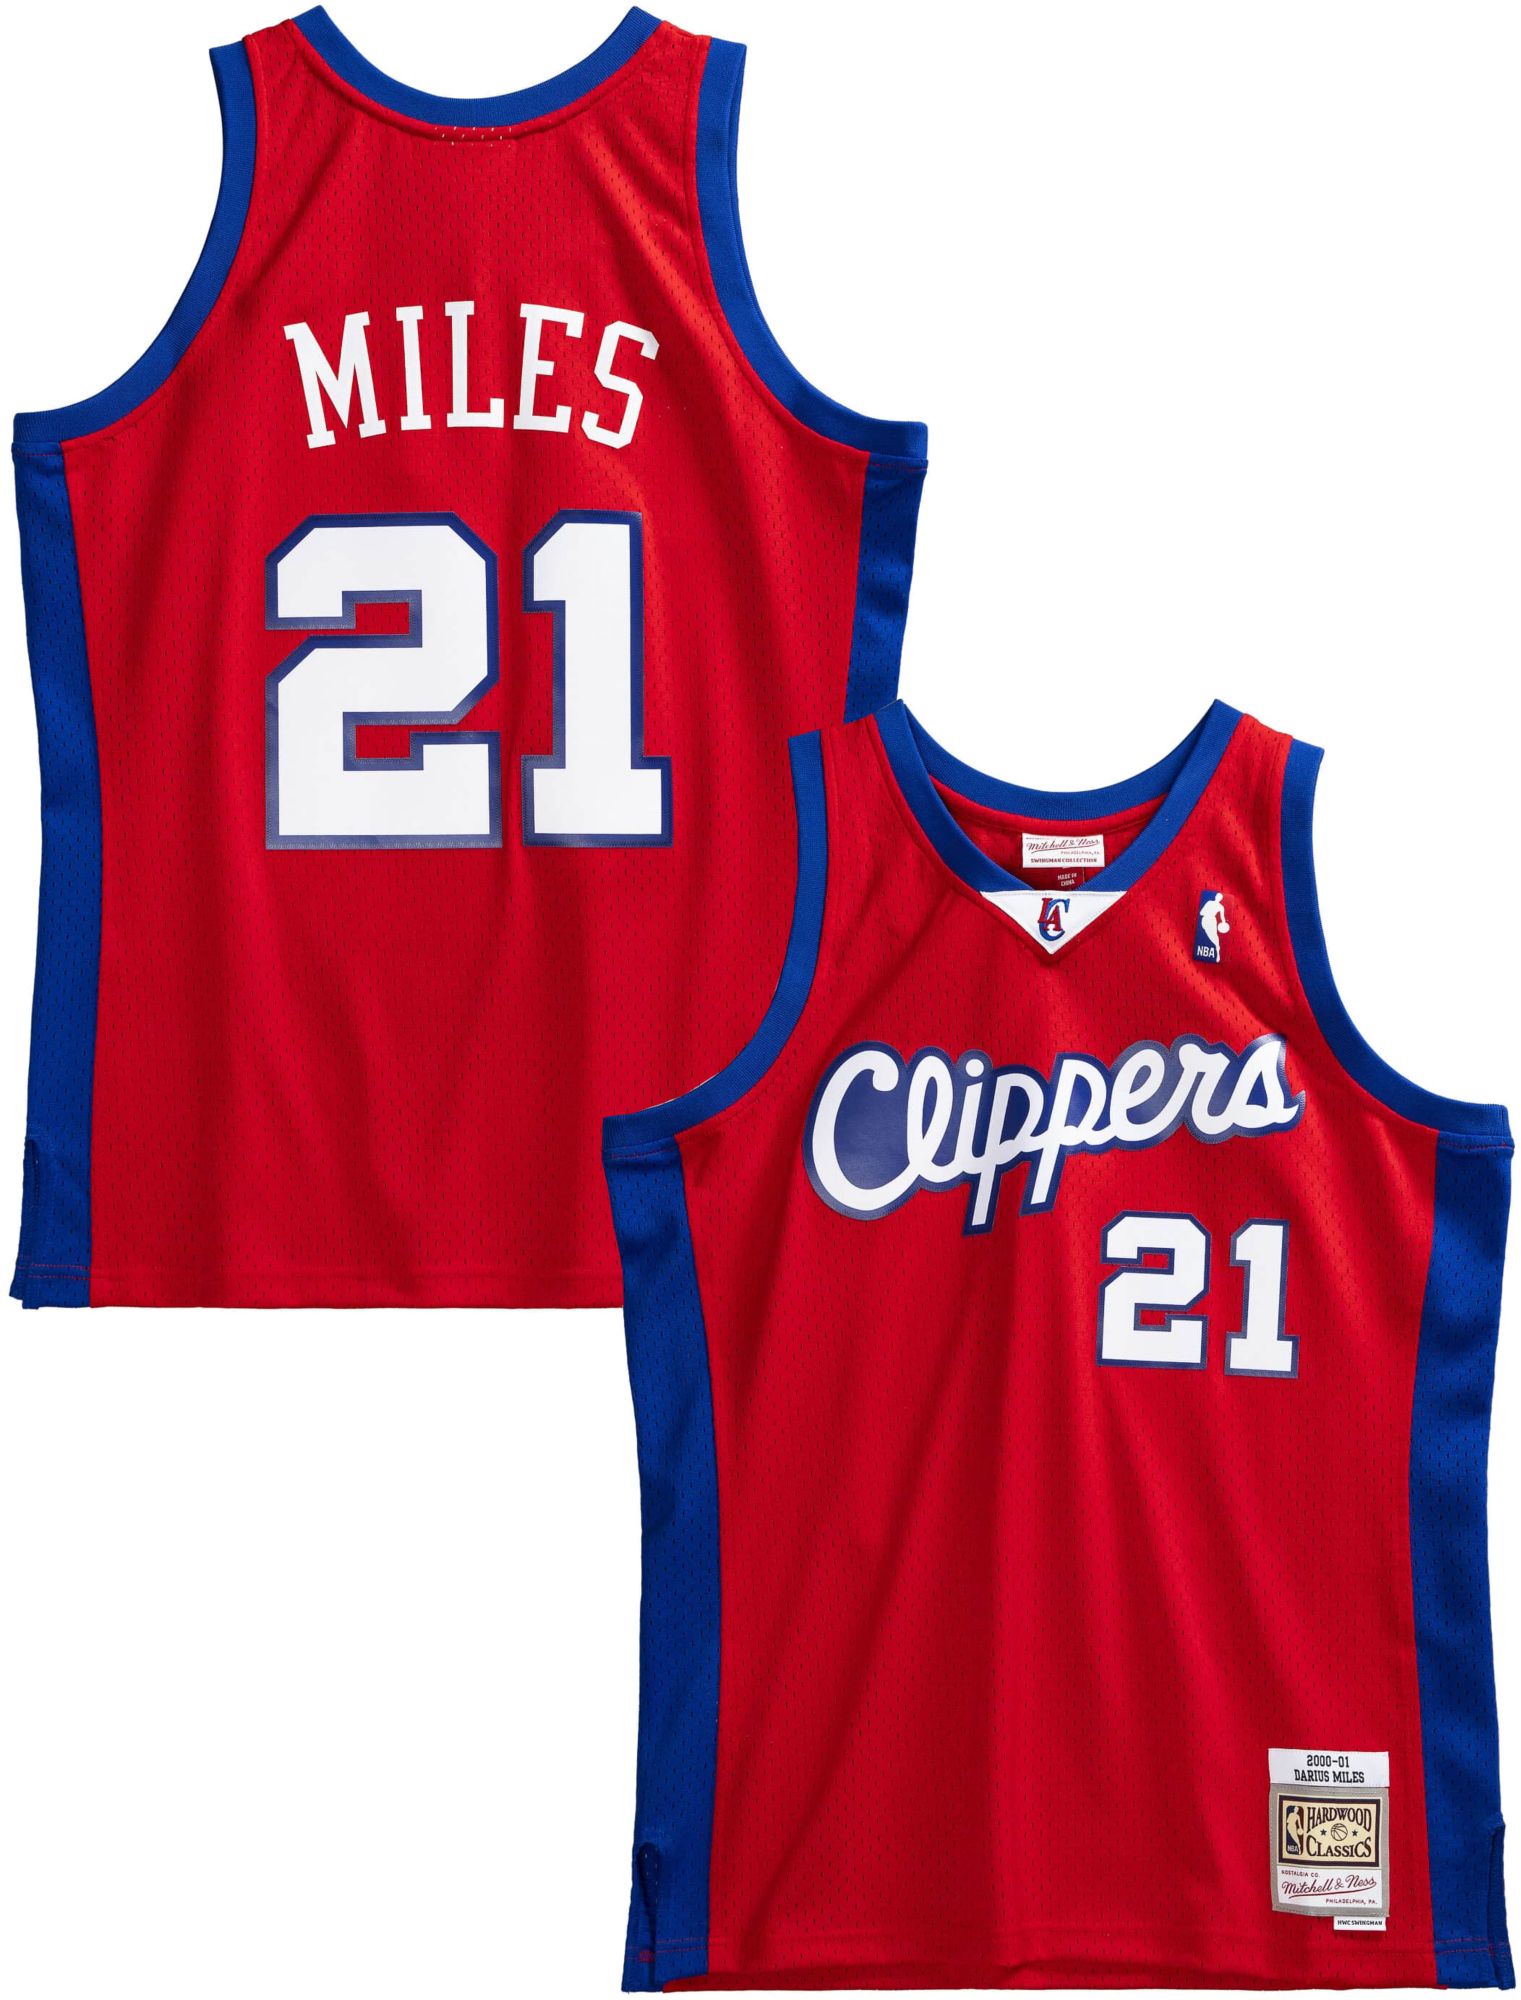 Clippers red jersey